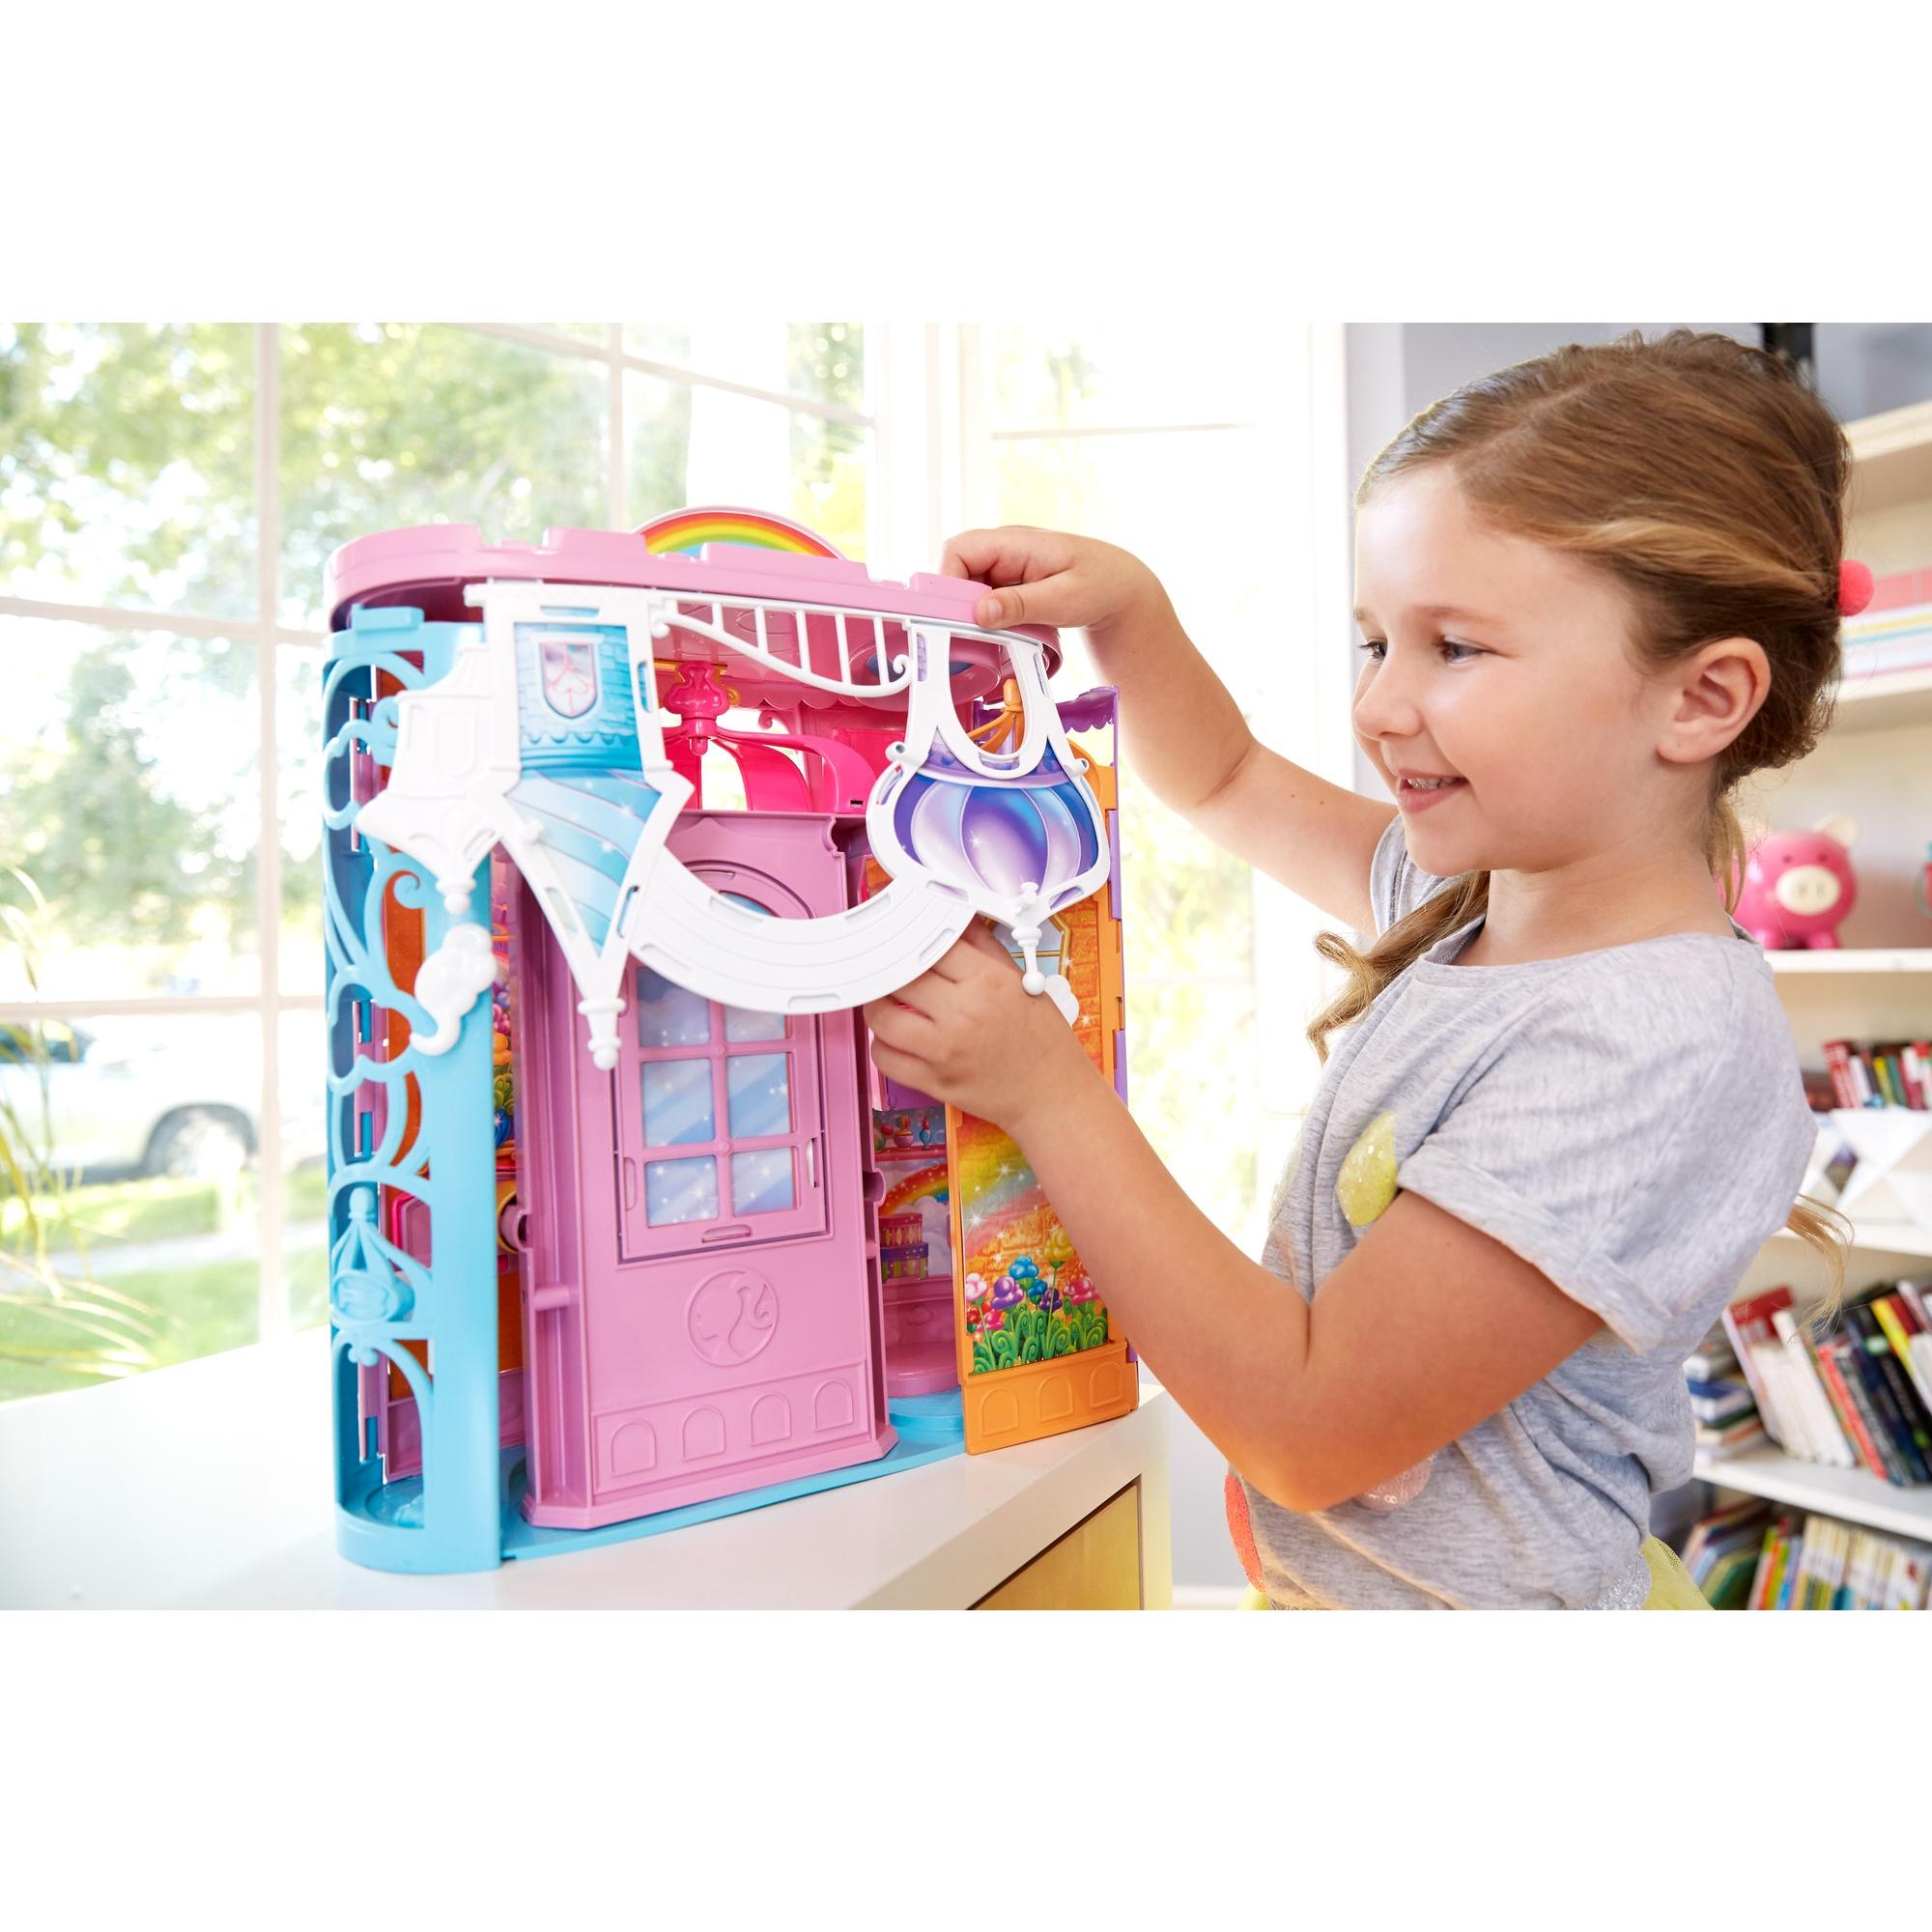 Barbie Dreamtopia Castle Portable Playset with Transforming Features - image 4 of 22